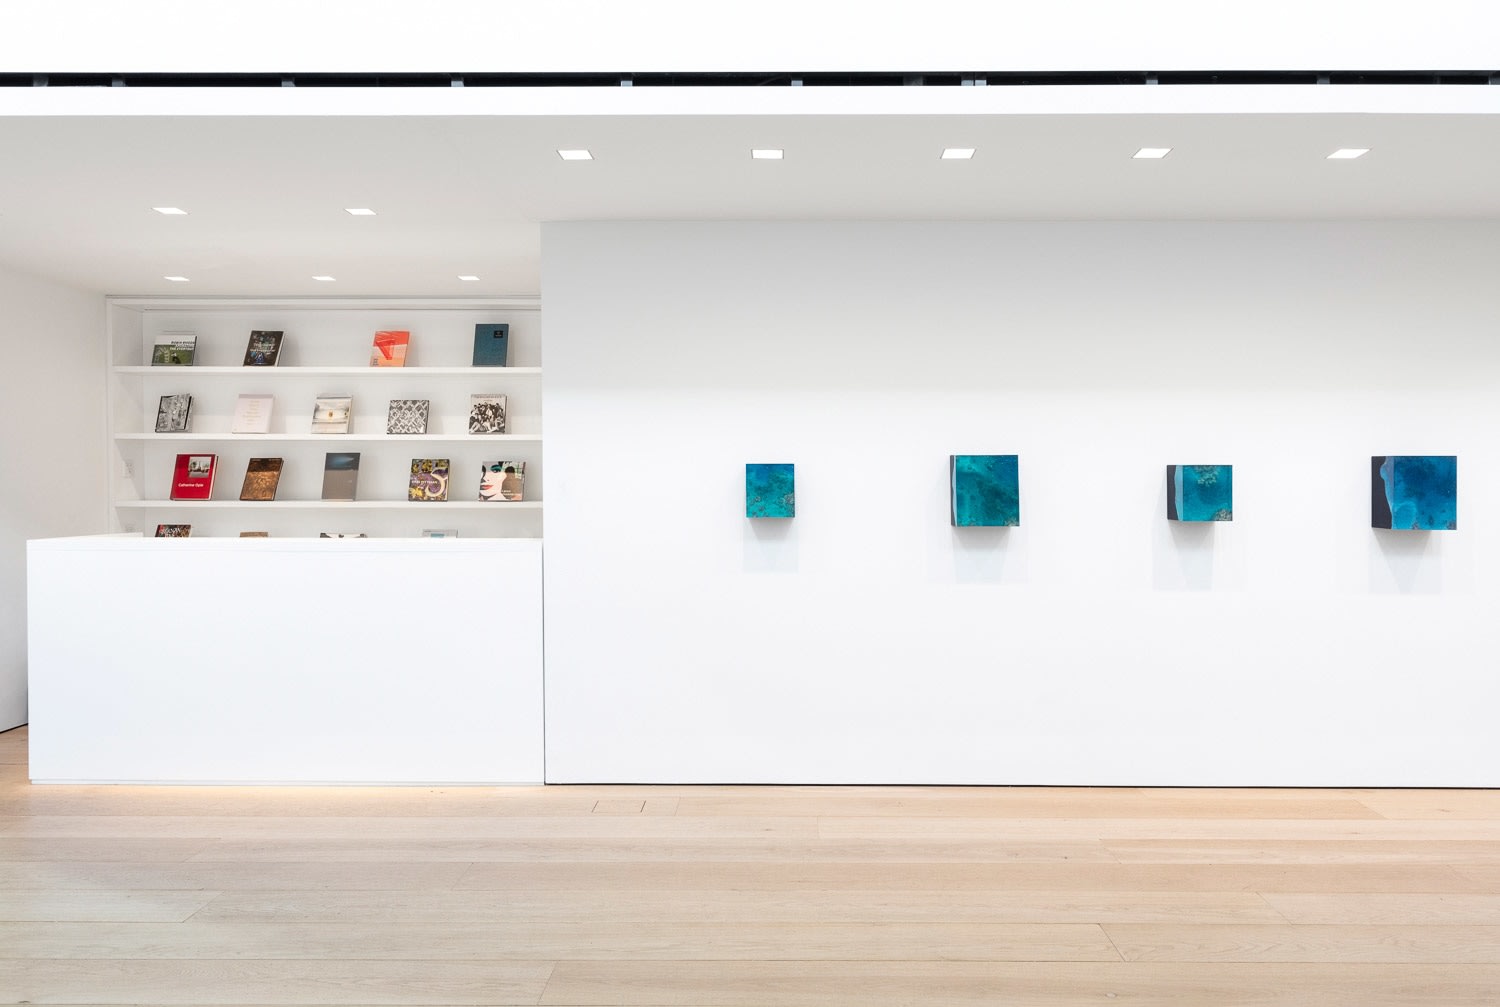 Ashley Bickerton: Seascapes at the End of History, Installation view, New York